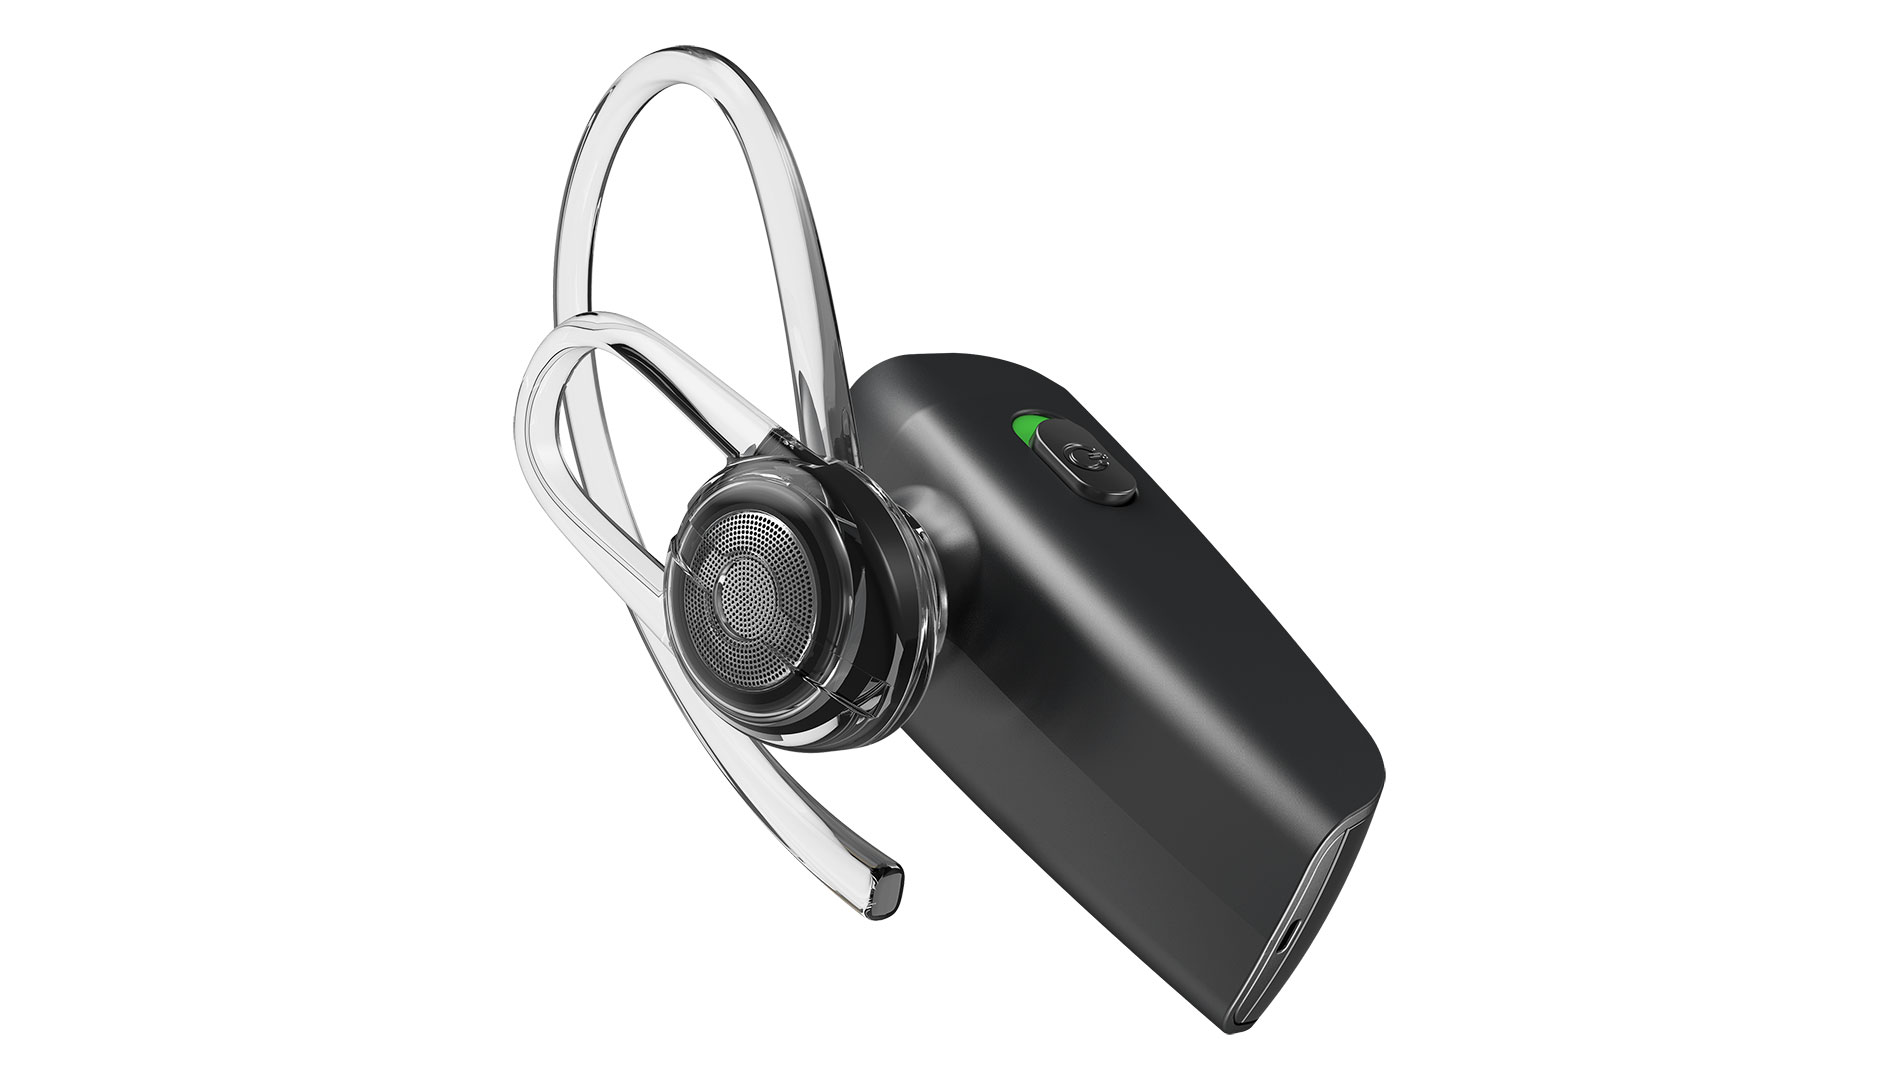 MOTO HK385 - In-ear Wireless Mono Headset with soft ear cap for comfort fit - Product image